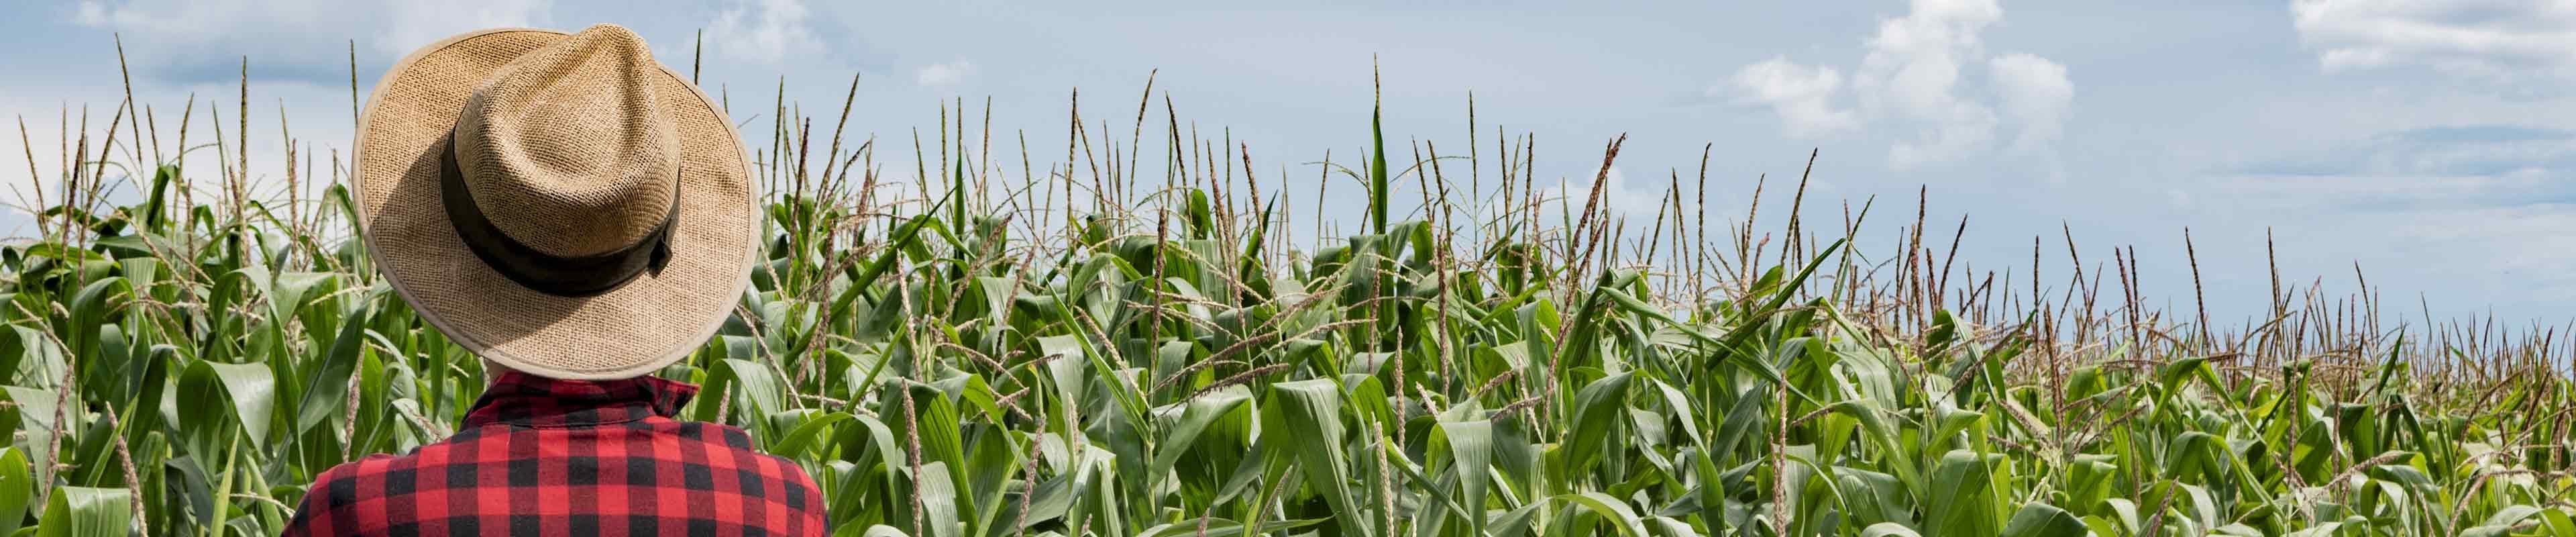 Farmer looking at a tall crop of corn under the sun